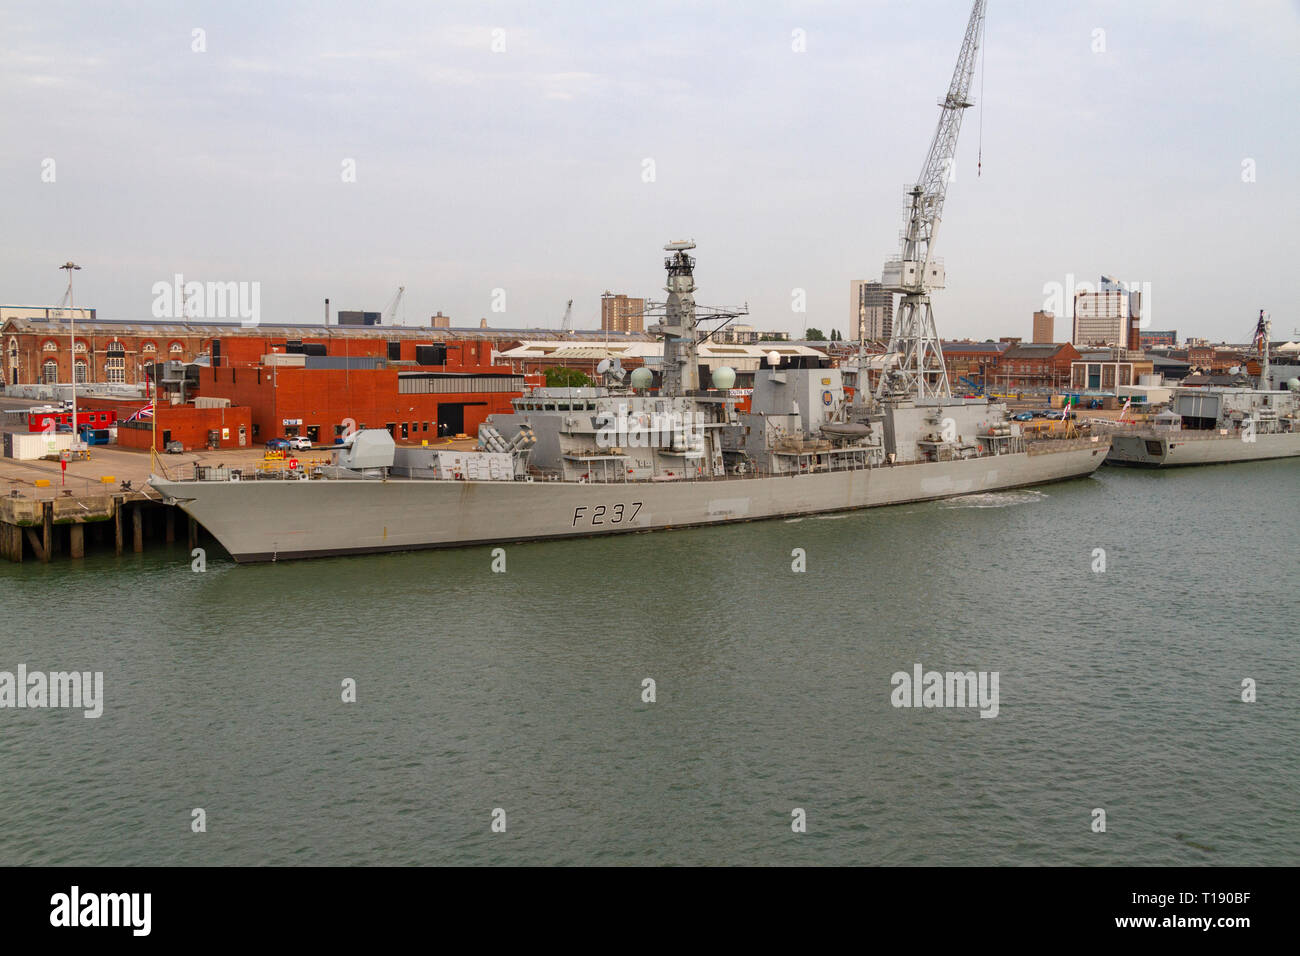 The HMS Westminster (F237) is a Type 23 frigate of the Royal Navy, moored in the Royal Navy Dockyard, Portsmouth, UK. Stock Photo